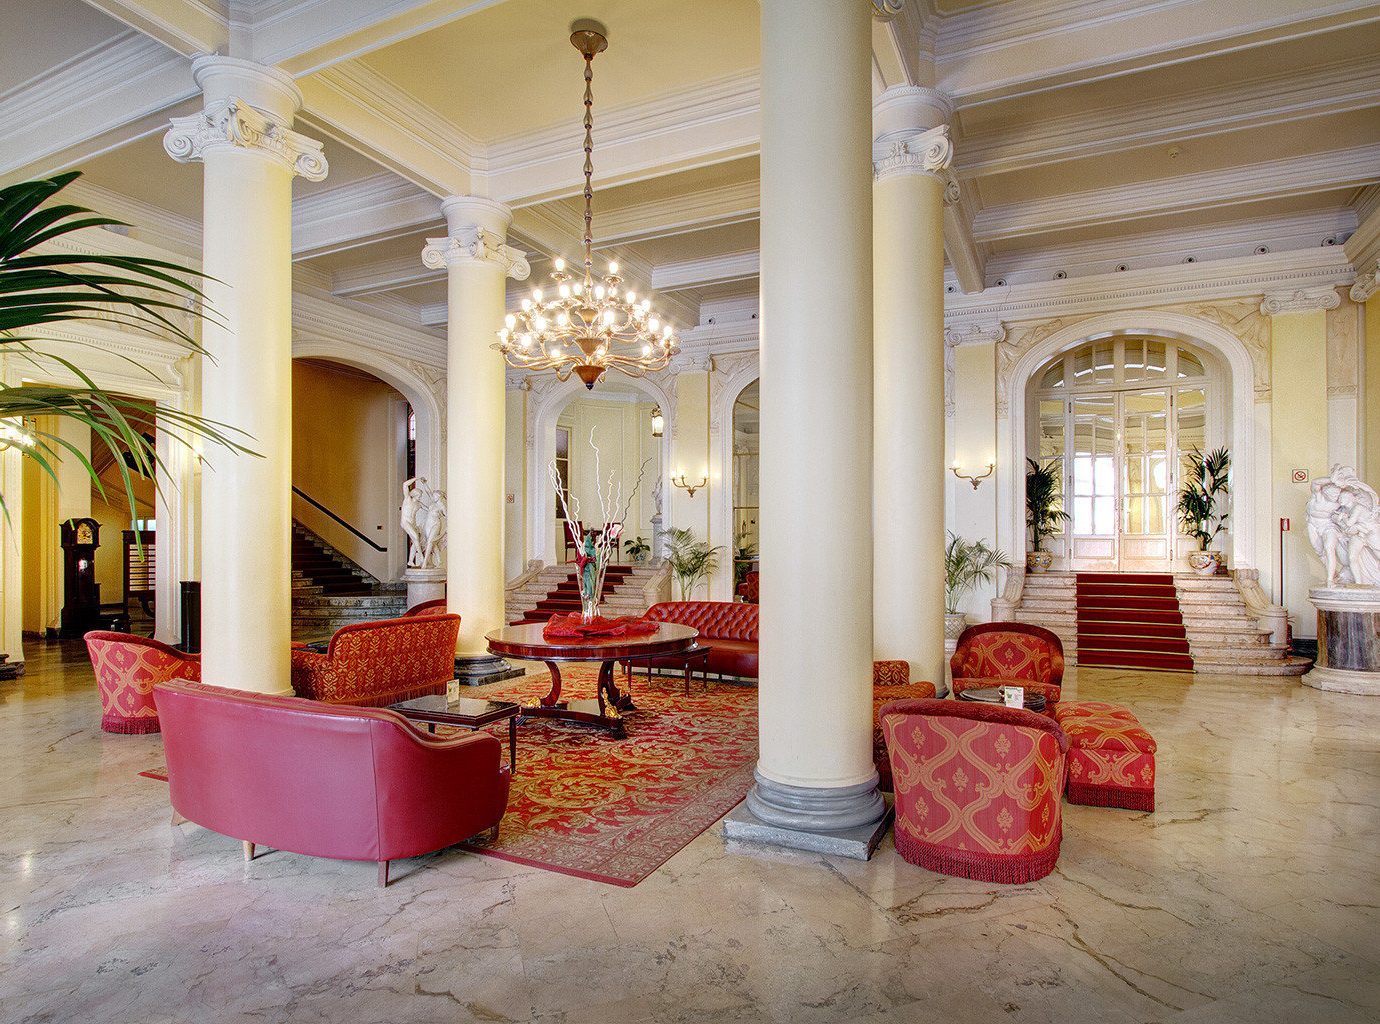 Architecture Lobby Lounge Resort property red building palace mansion aisle home hall ballroom living room hacienda flooring